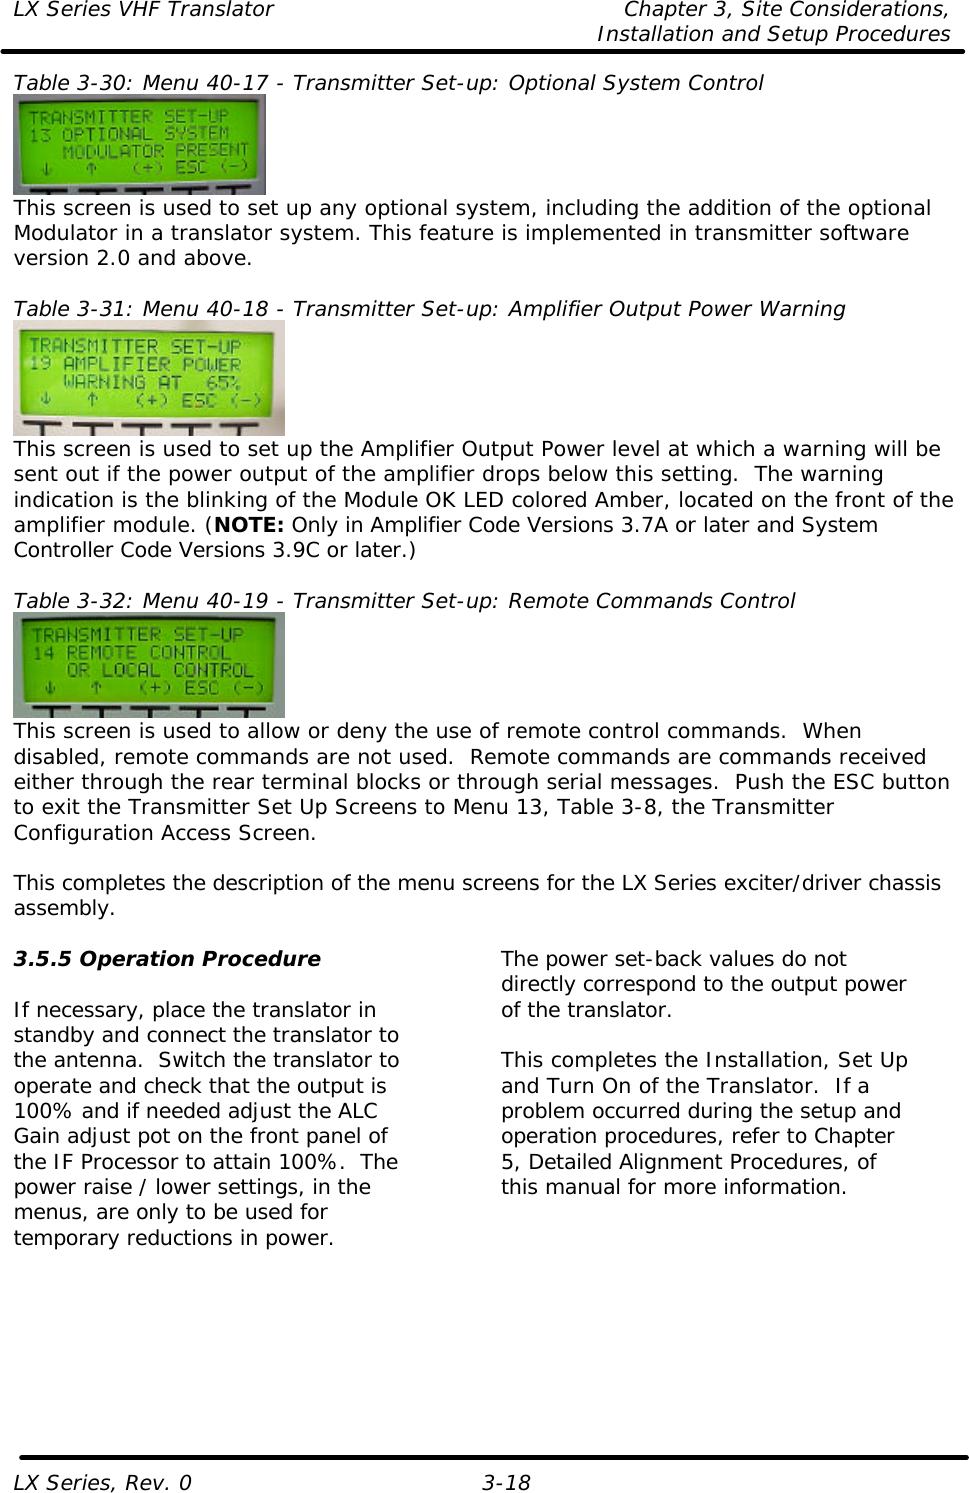 LX Series VHF Translator Chapter 3, Site Considerations,   Installation and Setup Procedures LX Series, Rev. 0 3-18 Table 3-30: Menu 40-17 - Transmitter Set-up: Optional System Control  This screen is used to set up any optional system, including the addition of the optional Modulator in a translator system. This feature is implemented in transmitter software version 2.0 and above.  Table 3-31: Menu 40-18 - Transmitter Set-up: Amplifier Output Power Warning  This screen is used to set up the Amplifier Output Power level at which a warning will be sent out if the power output of the amplifier drops below this setting.  The warning indication is the blinking of the Module OK LED colored Amber, located on the front of the amplifier module. (NOTE: Only in Amplifier Code Versions 3.7A or later and System Controller Code Versions 3.9C or later.)  Table 3-32: Menu 40-19 - Transmitter Set-up: Remote Commands Control  This screen is used to allow or deny the use of remote control commands.  When disabled, remote commands are not used.  Remote commands are commands received either through the rear terminal blocks or through serial messages.  Push the ESC button to exit the Transmitter Set Up Screens to Menu 13, Table 3-8, the Transmitter Configuration Access Screen.  This completes the description of the menu screens for the LX Series exciter/driver chassis assembly. 3.5.5 Operation Procedure  If necessary, place the translator in standby and connect the translator to the antenna.  Switch the translator to operate and check that the output is 100% and if needed adjust the ALC Gain adjust pot on the front panel of the IF Processor to attain 100%.  The power raise / lower settings, in the menus, are only to be used for temporary reductions in power. The power set-back values do not directly correspond to the output power of the translator.  This completes the Installation, Set Up and Turn On of the Translator.  If a problem occurred during the setup and operation procedures, refer to Chapter 5, Detailed Alignment Procedures, of this manual for more information.  